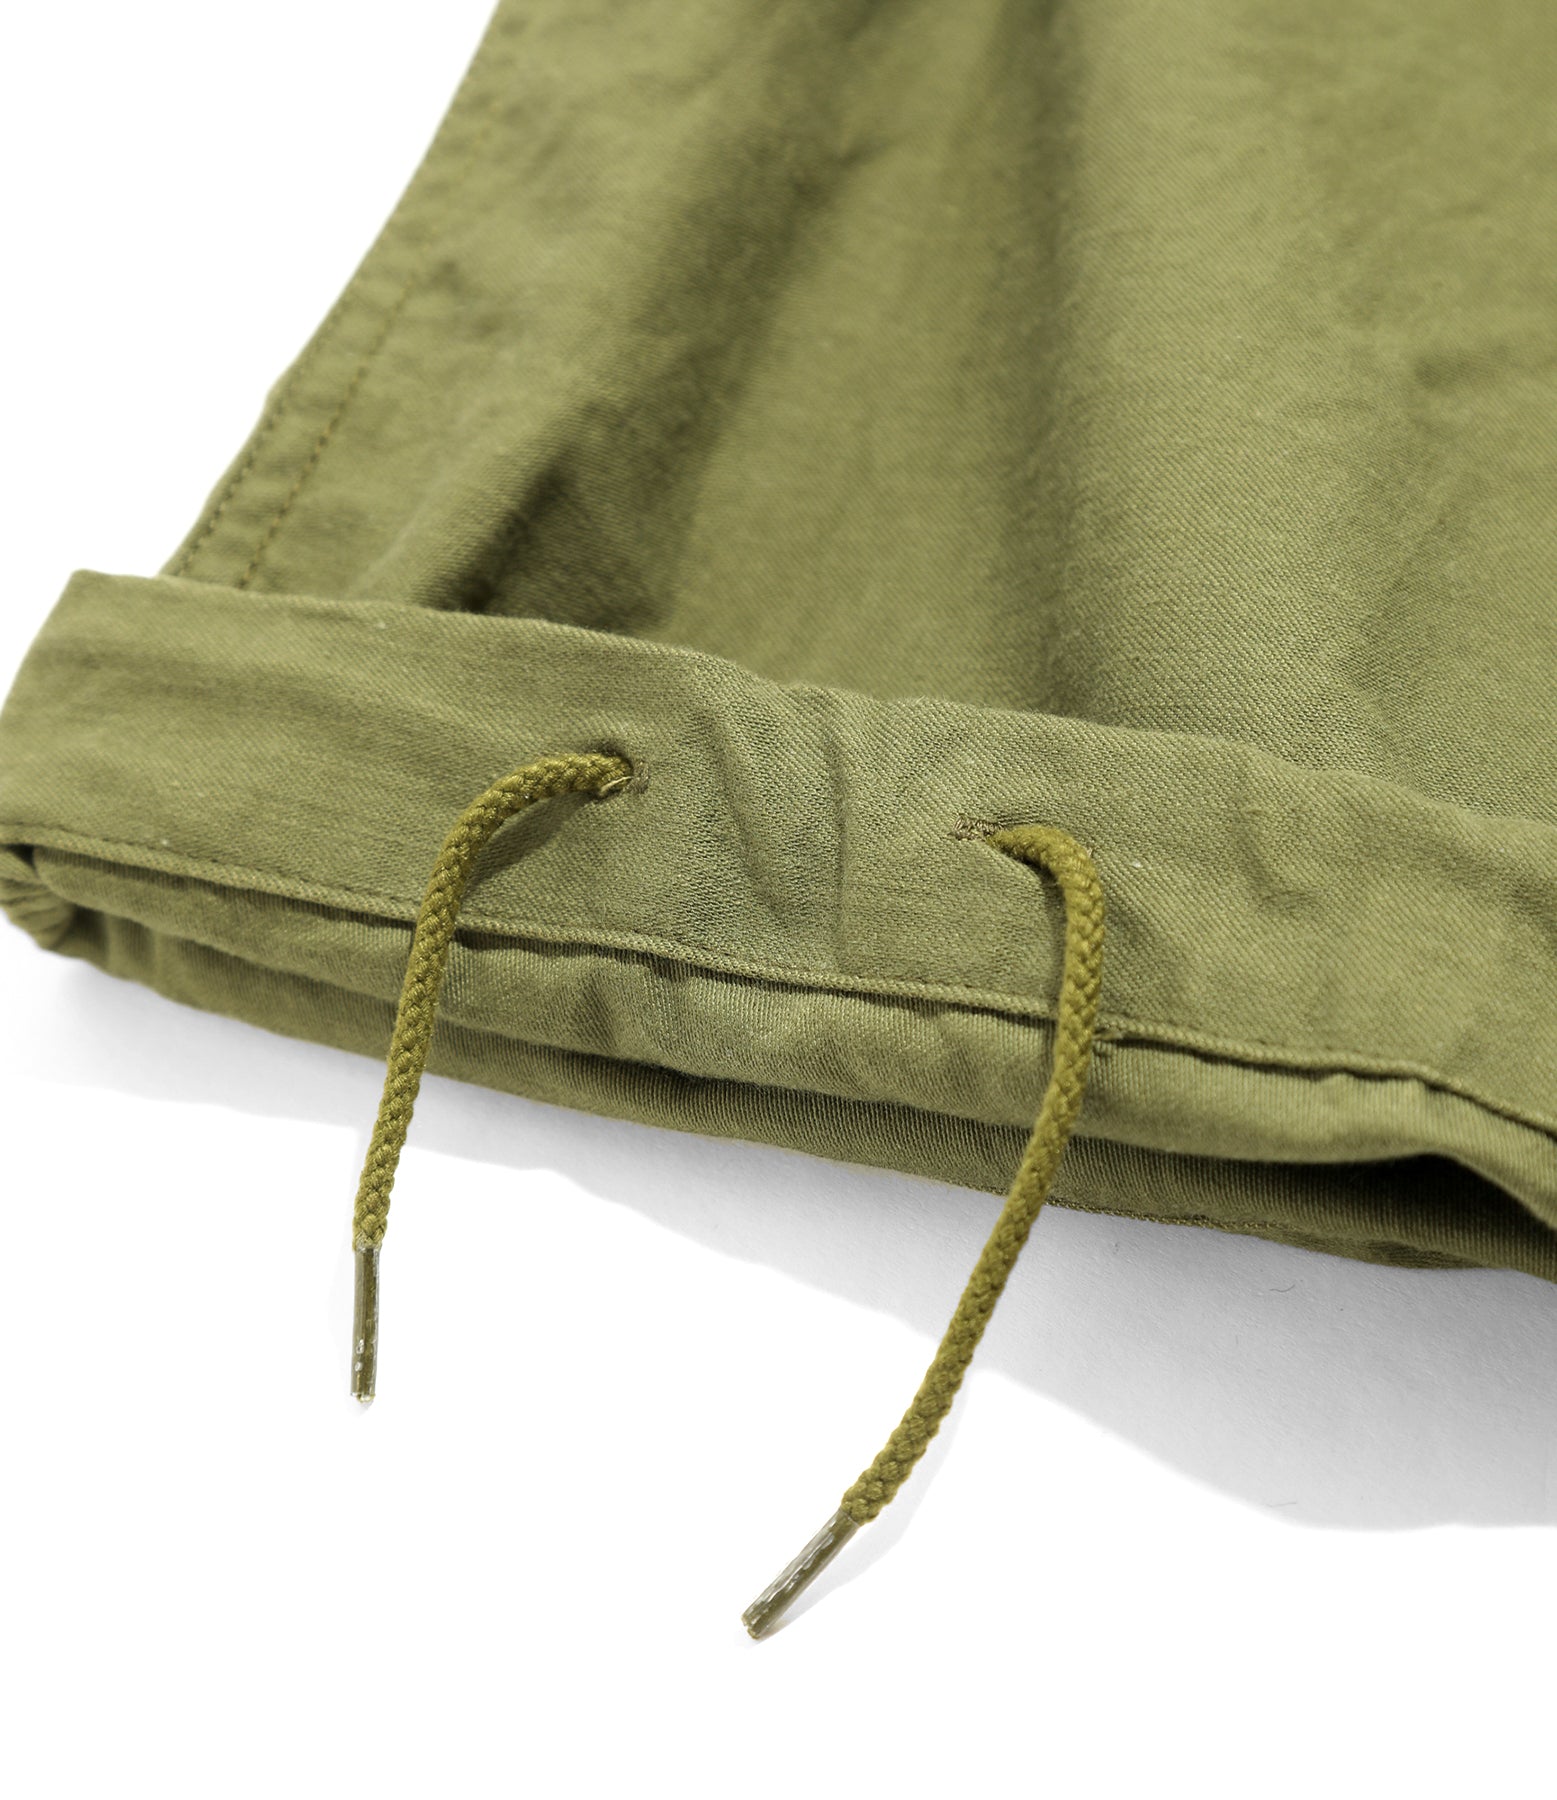 Fatigue Pant - Olive - Back Sateen